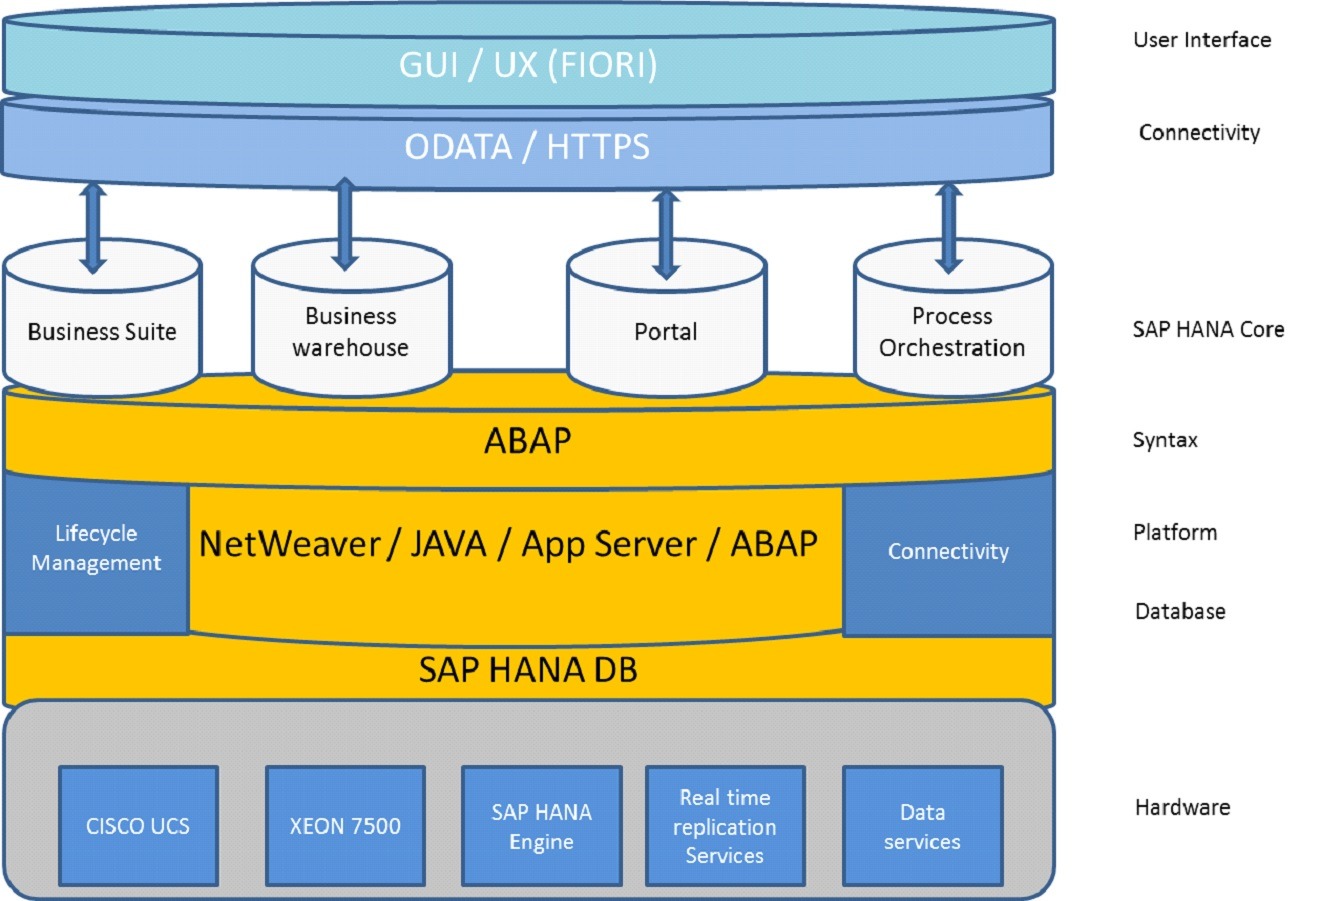 sap-s-4hana-know-about-the-technology-in-detail-pcquest